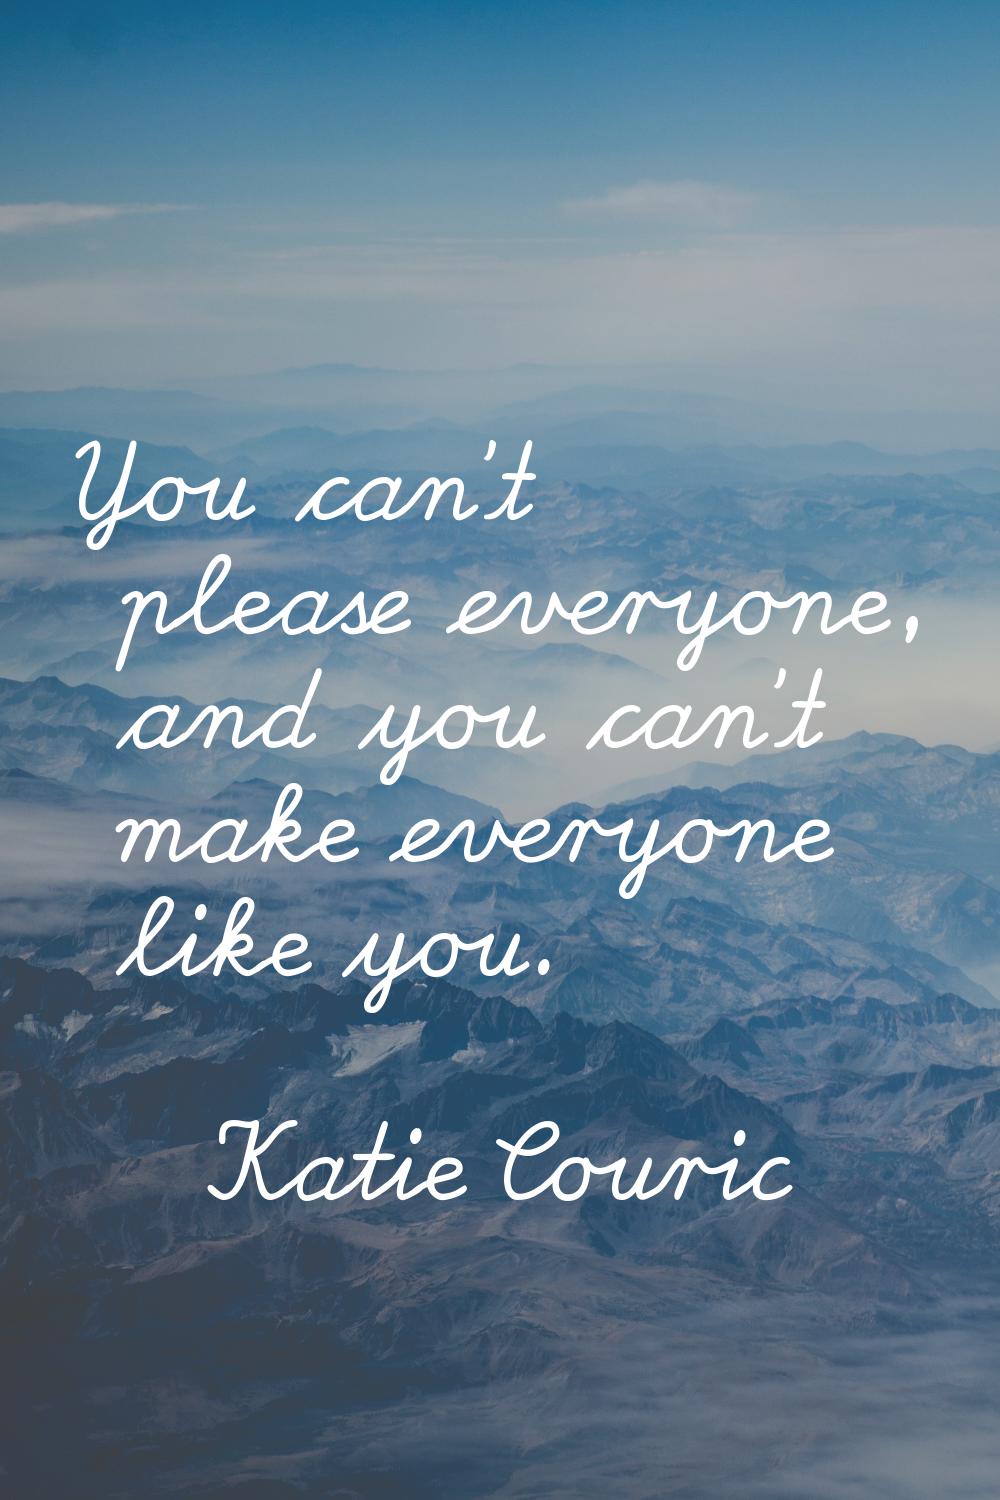 You can't please everyone, and you can't make everyone like you.